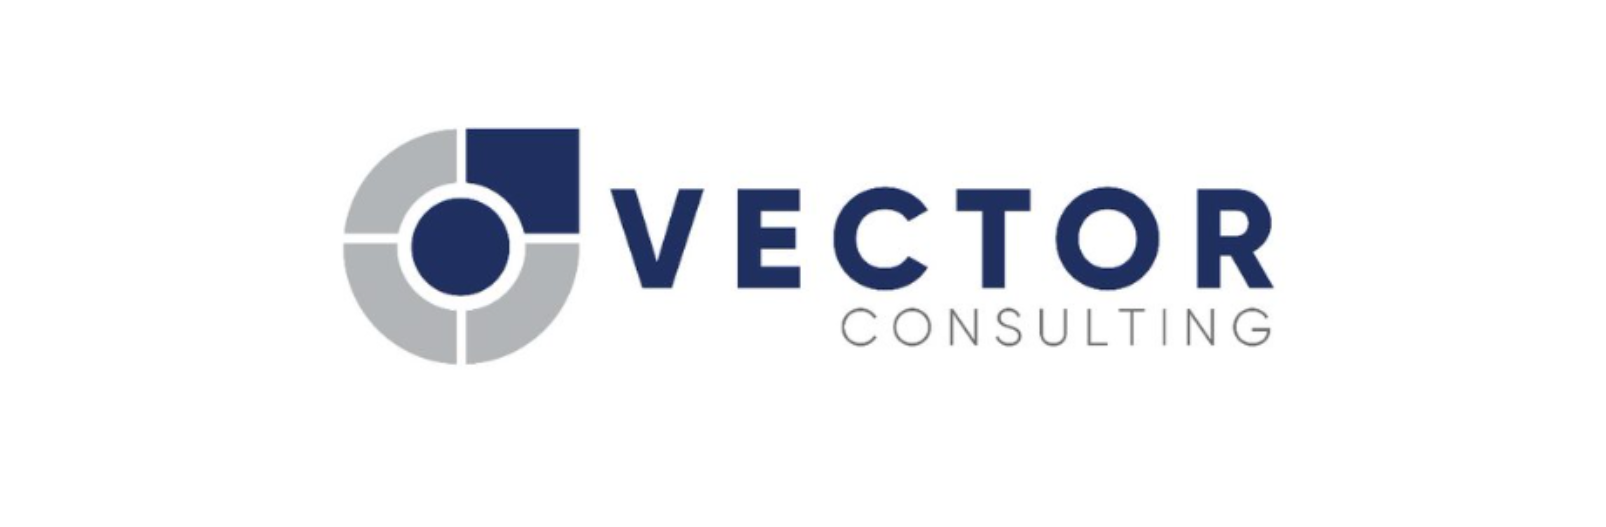 VECTOR CONSULTING